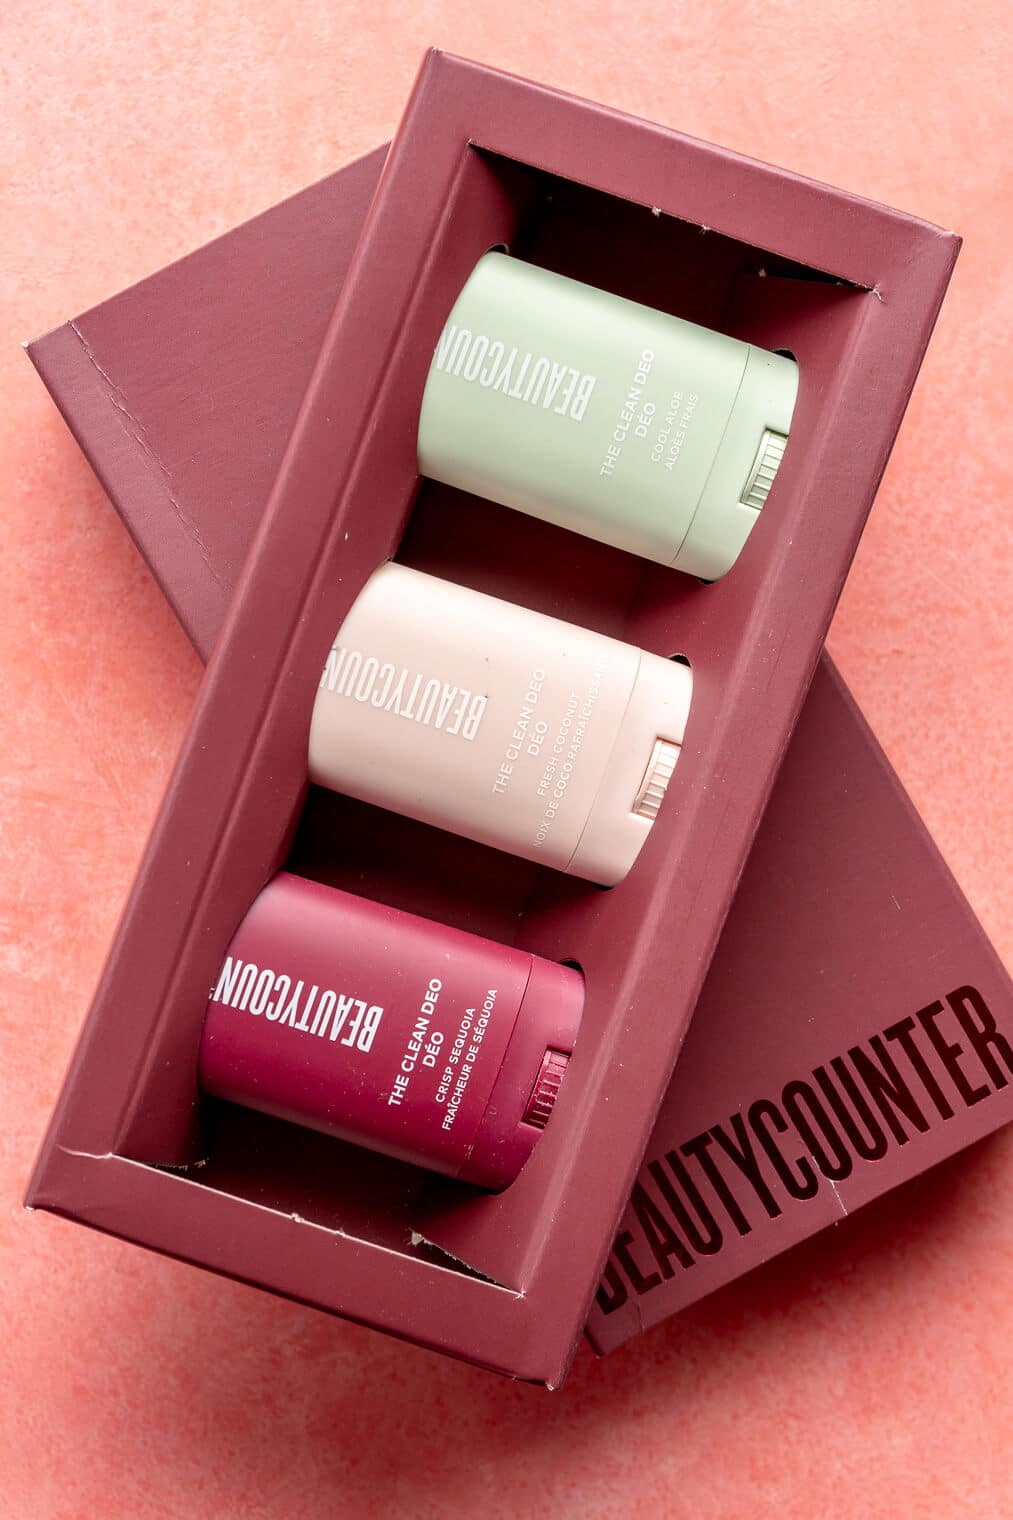 Three miniature deodorants in a rectangle maroon box sitting on a pink blush surface.